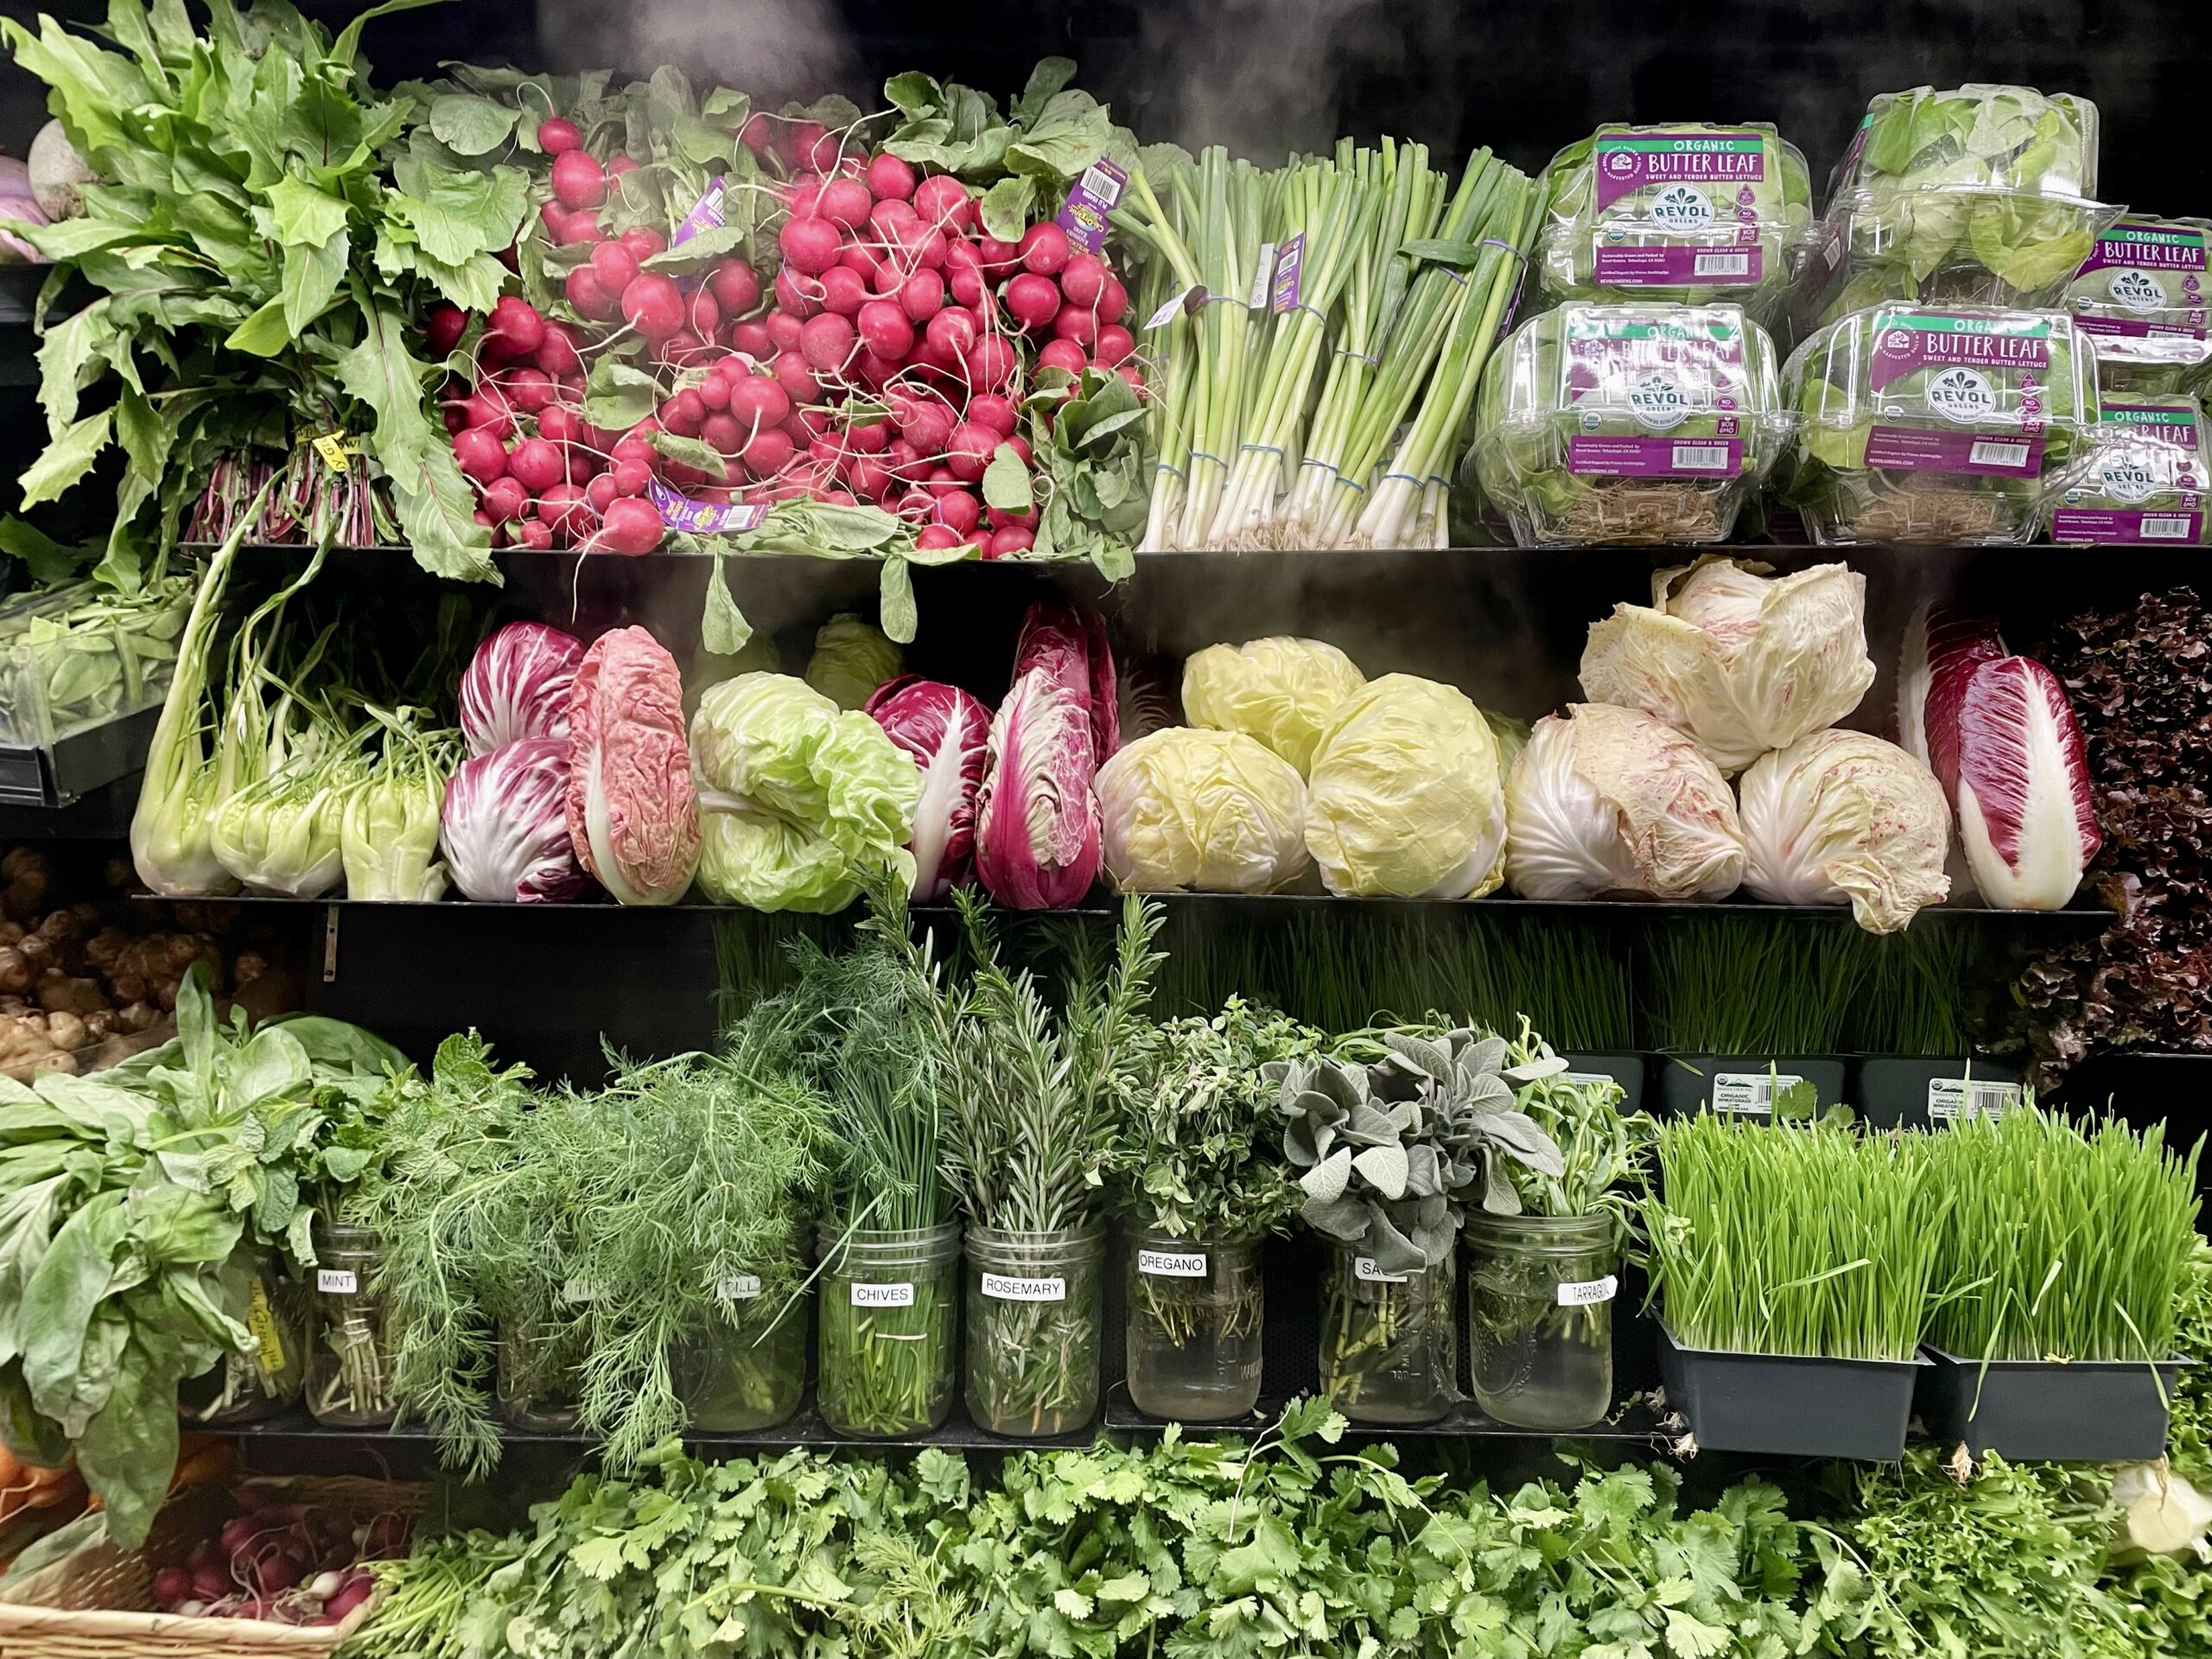 Boldly Grown Farms produce in the vegetable aisle at a grocery store